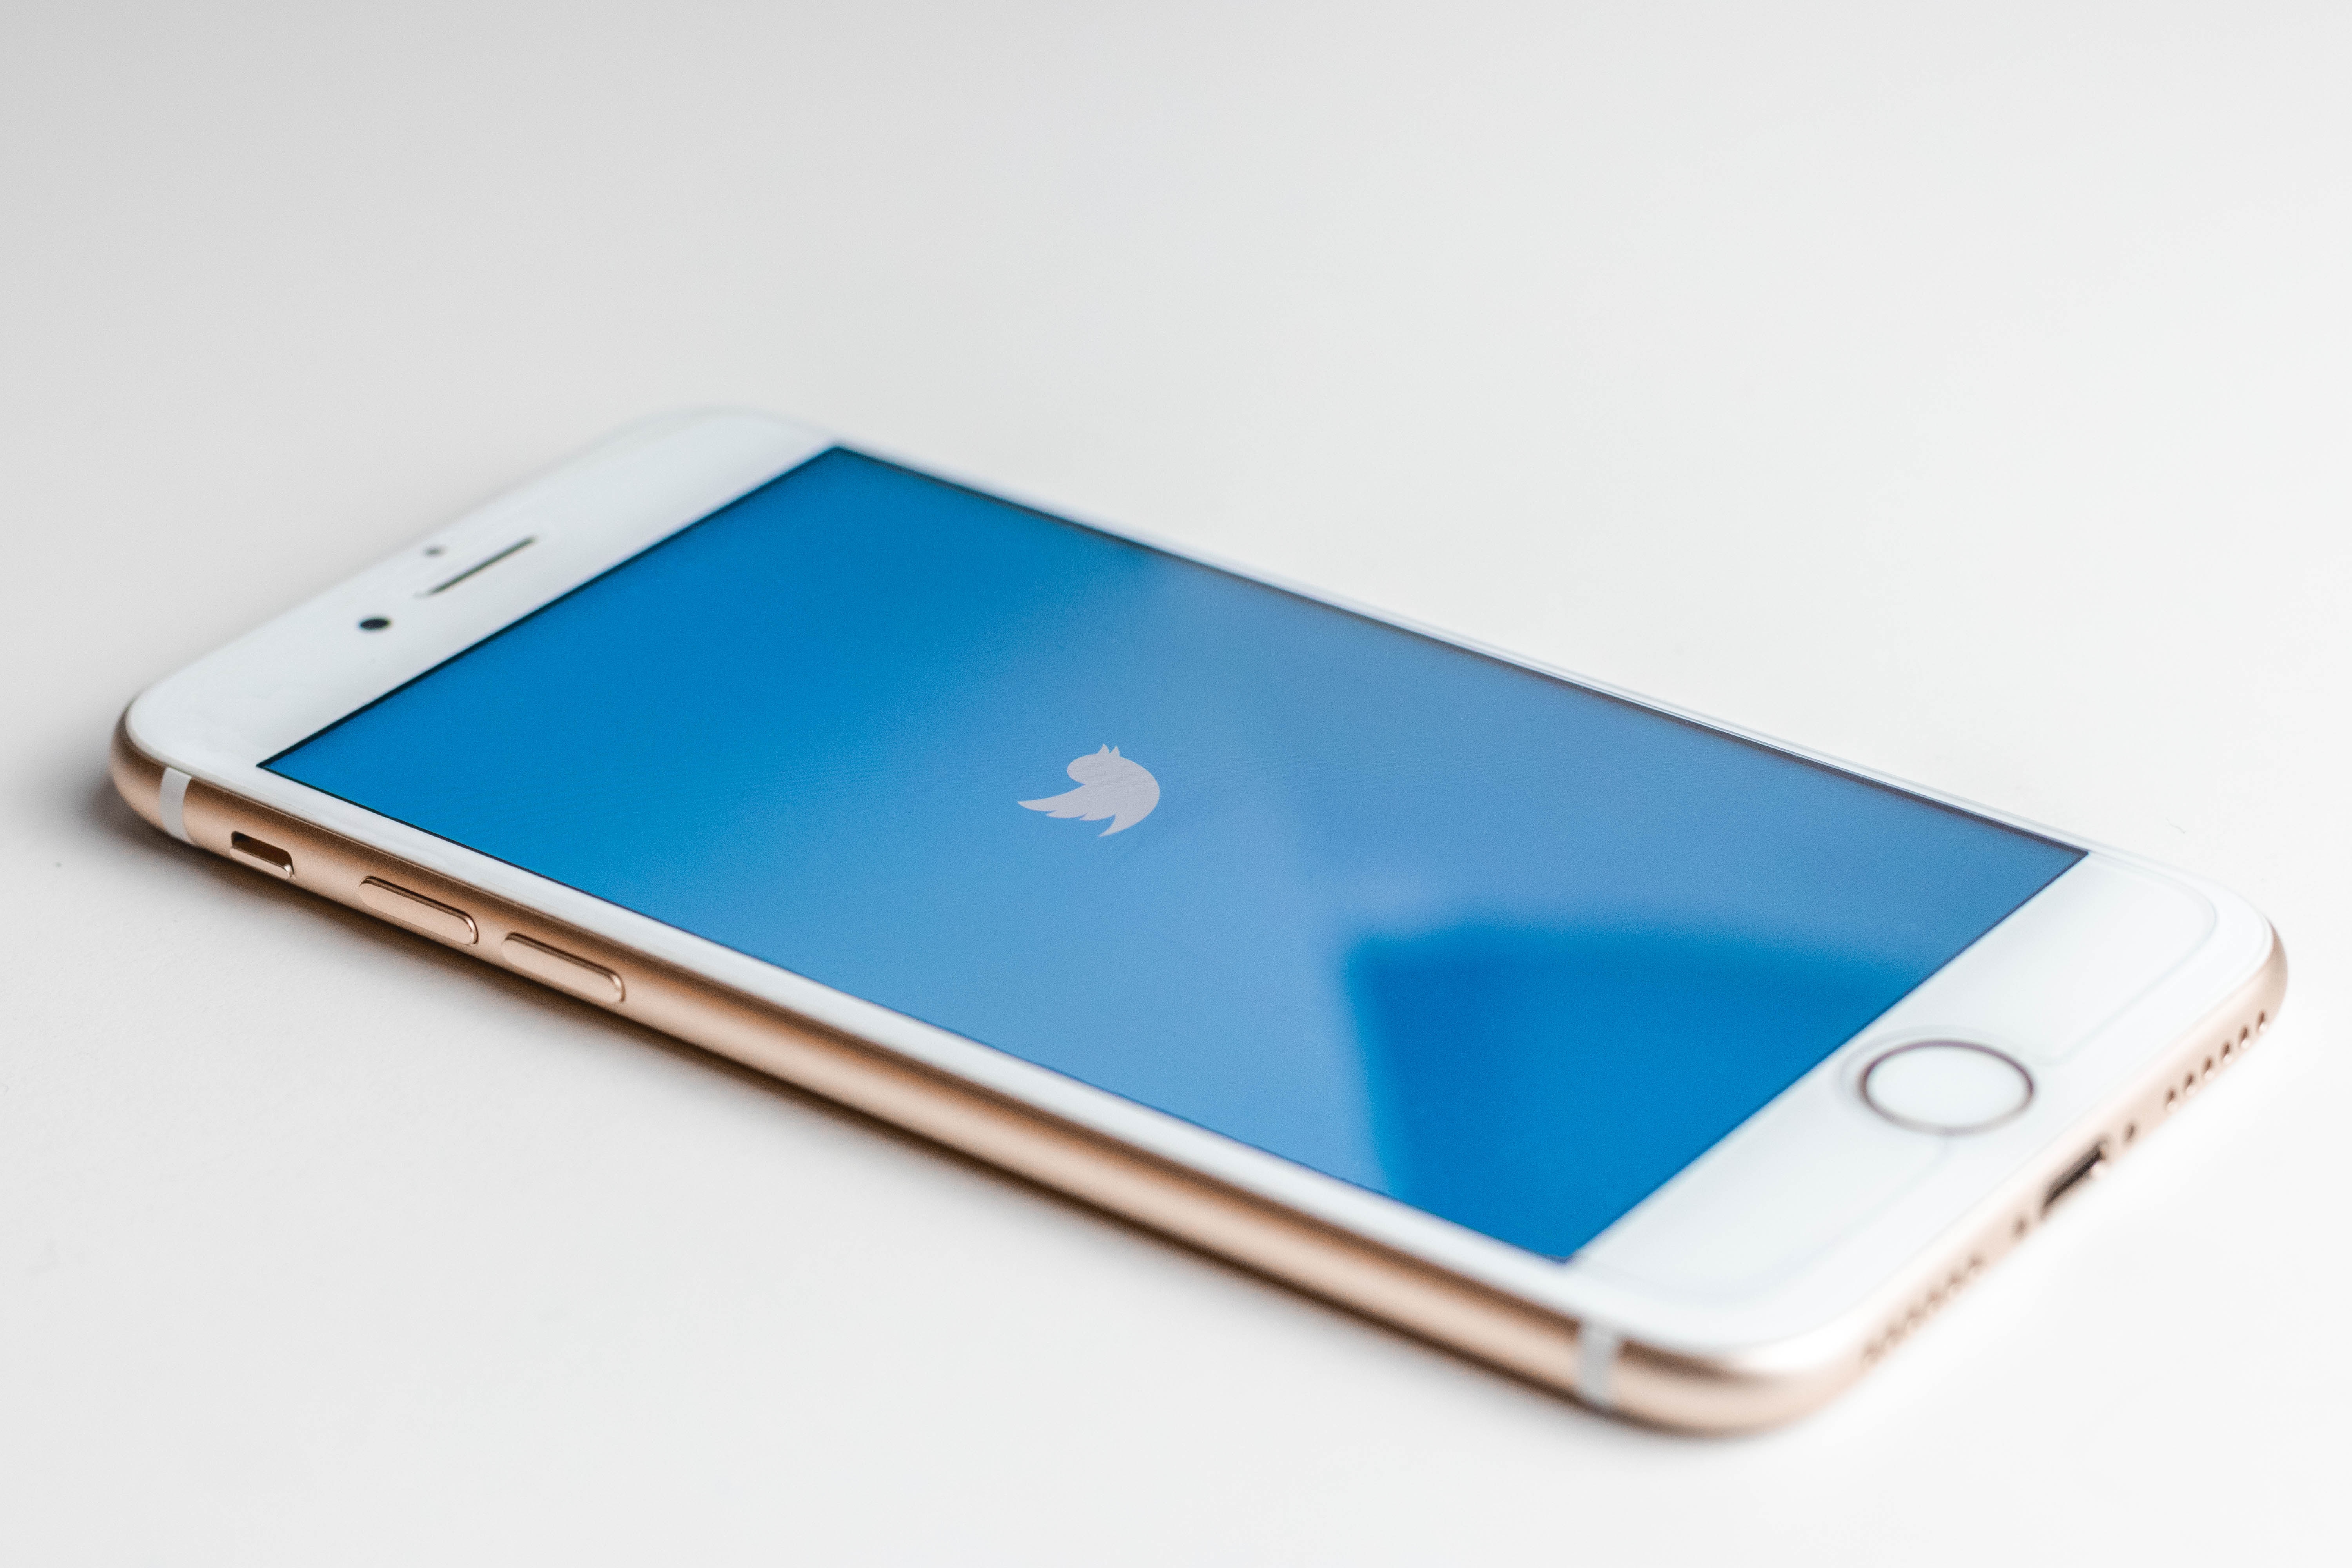 A gold iPhone with a Twitter logo onscreen